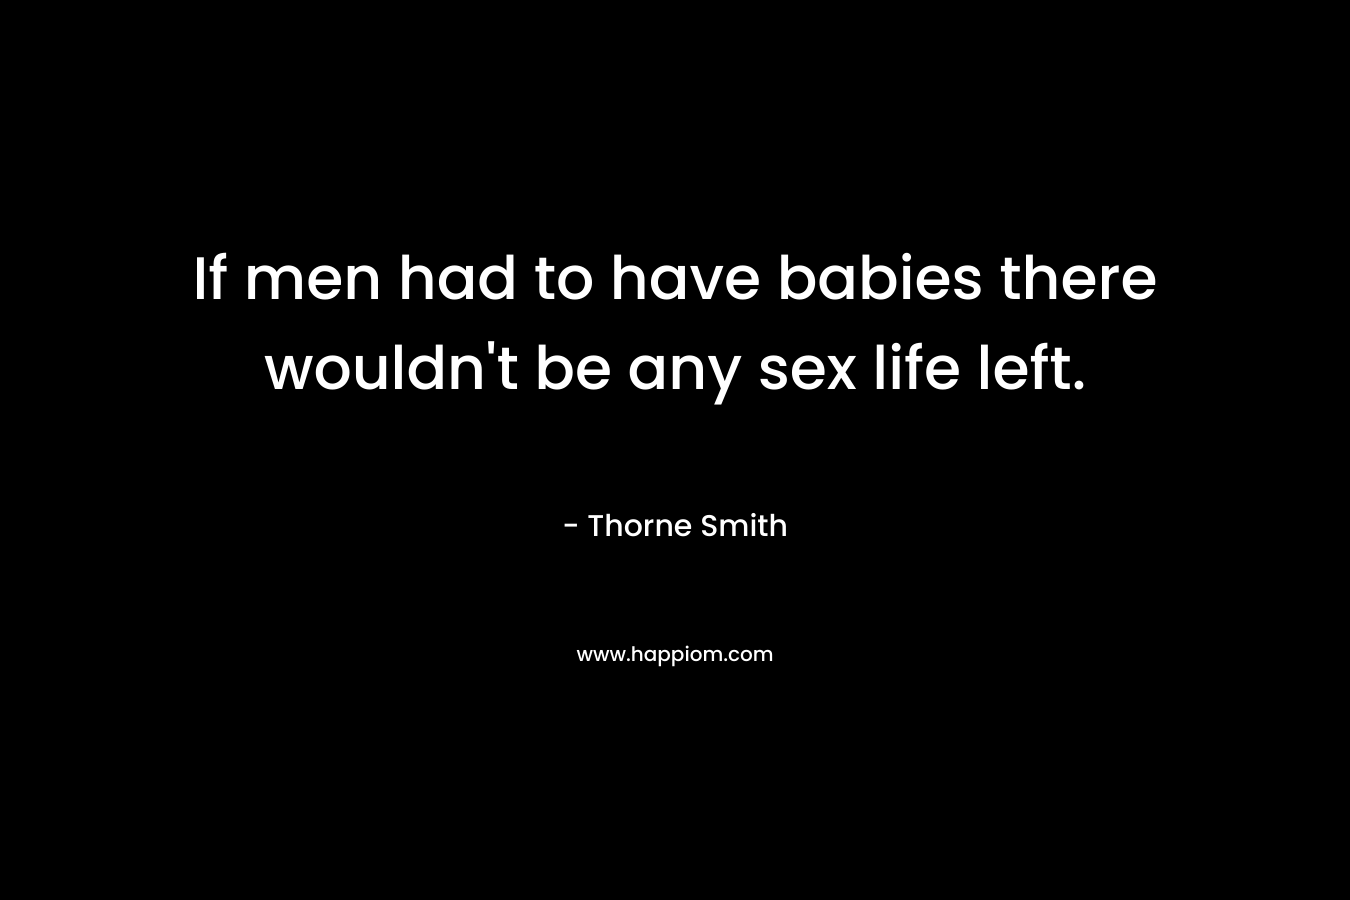 If men had to have babies there wouldn’t be any sex life left. – Thorne Smith